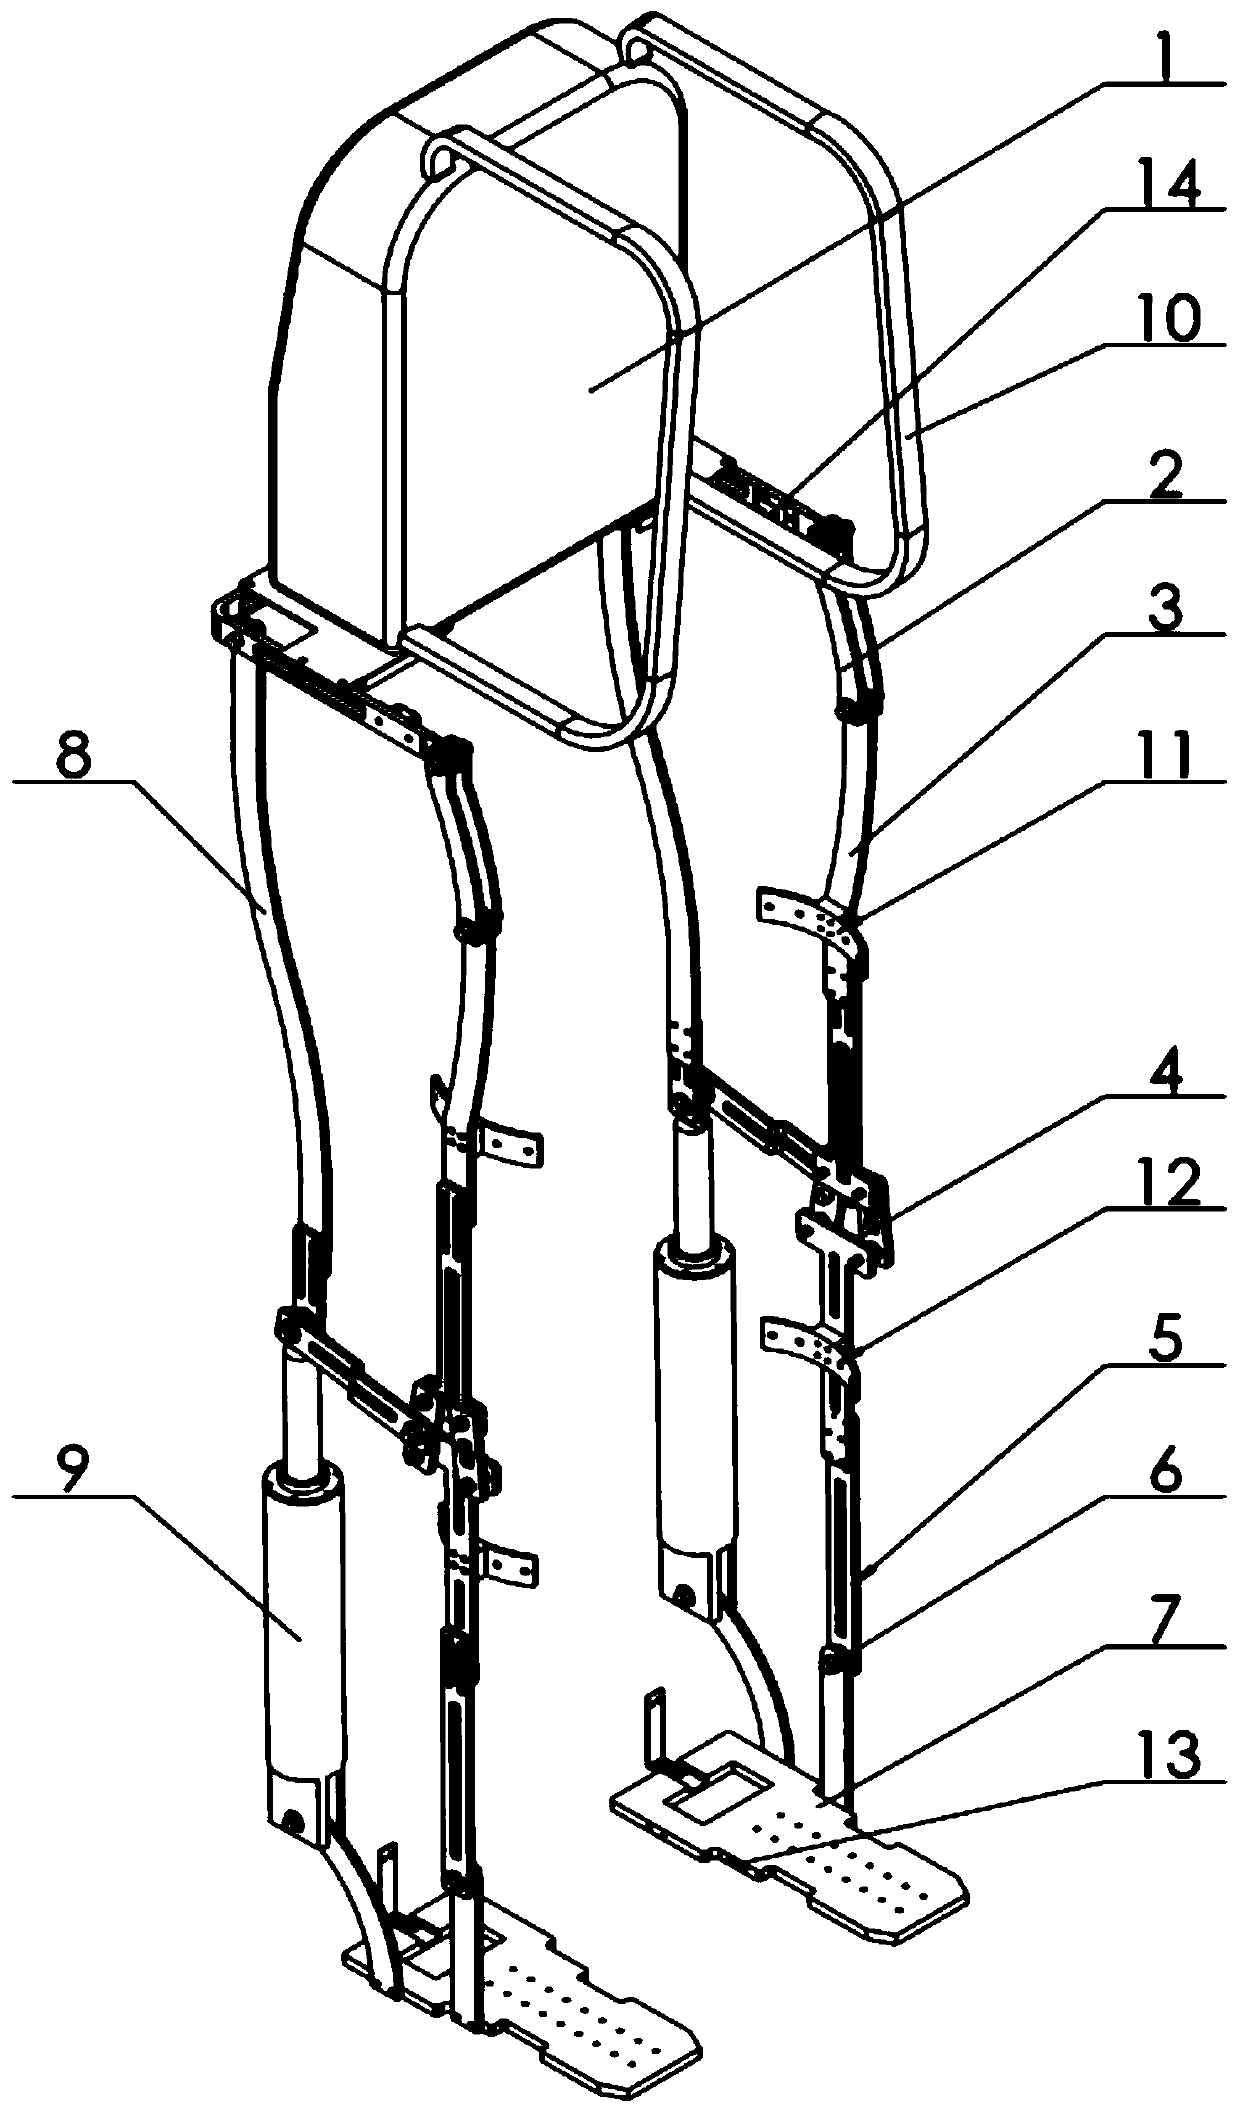 Lower limb exoskeleton with variable-axis knee joints